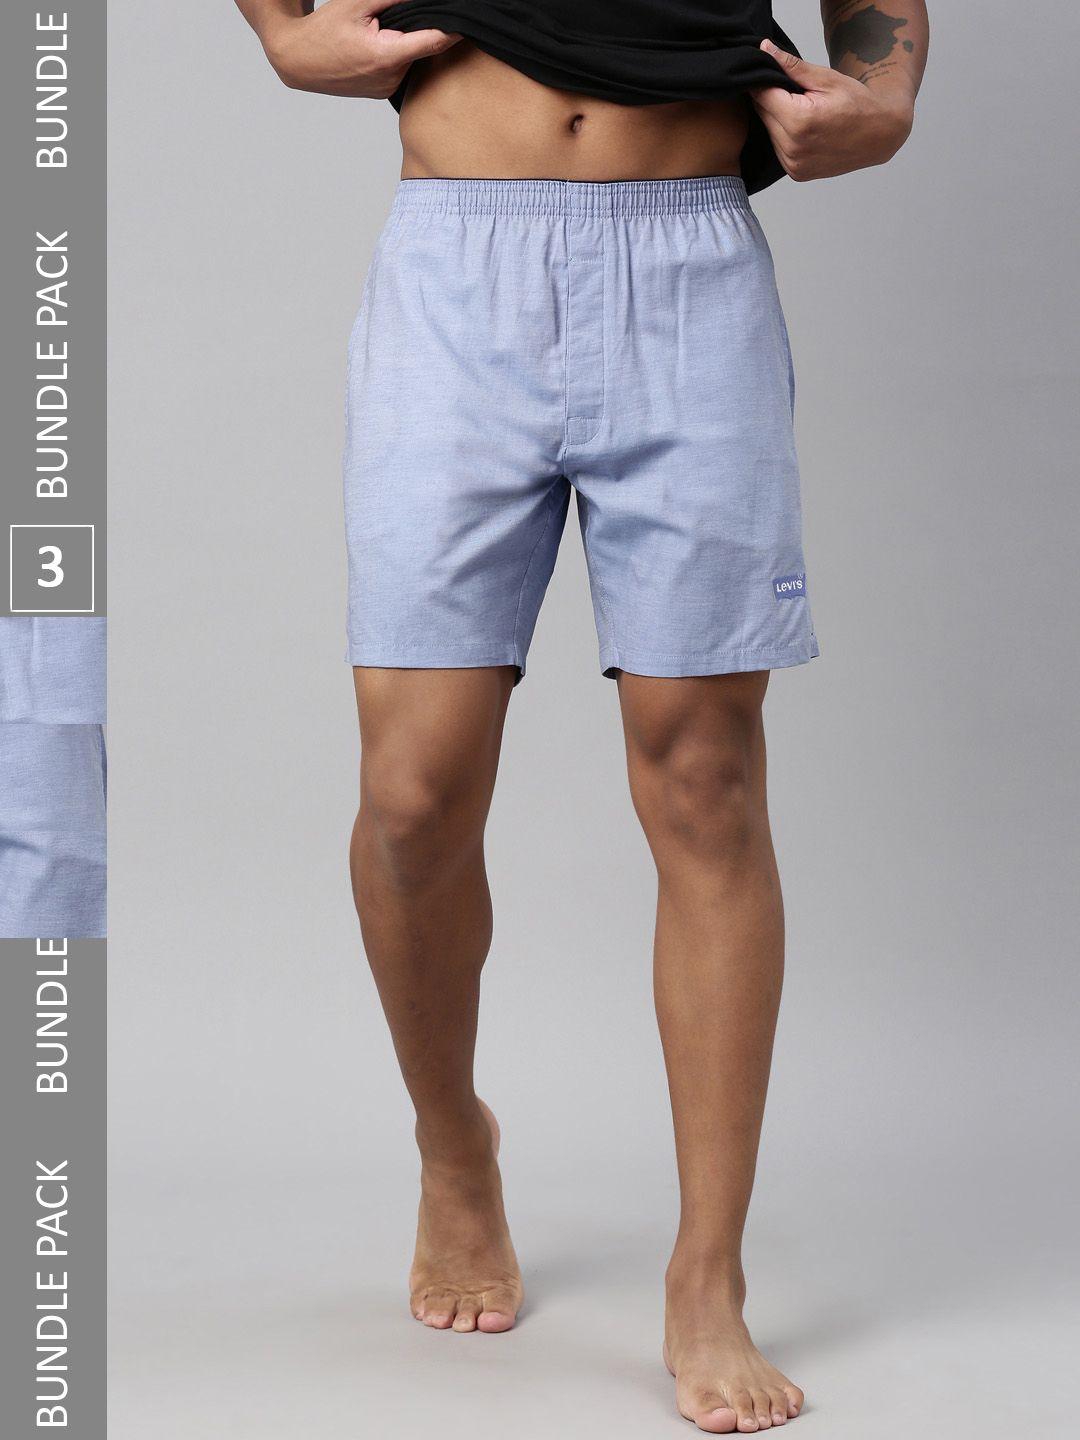 levis-pack-of-3-men-smartskin-technology-woven-cotton-boxer-shorts-with-tag-free-comfort